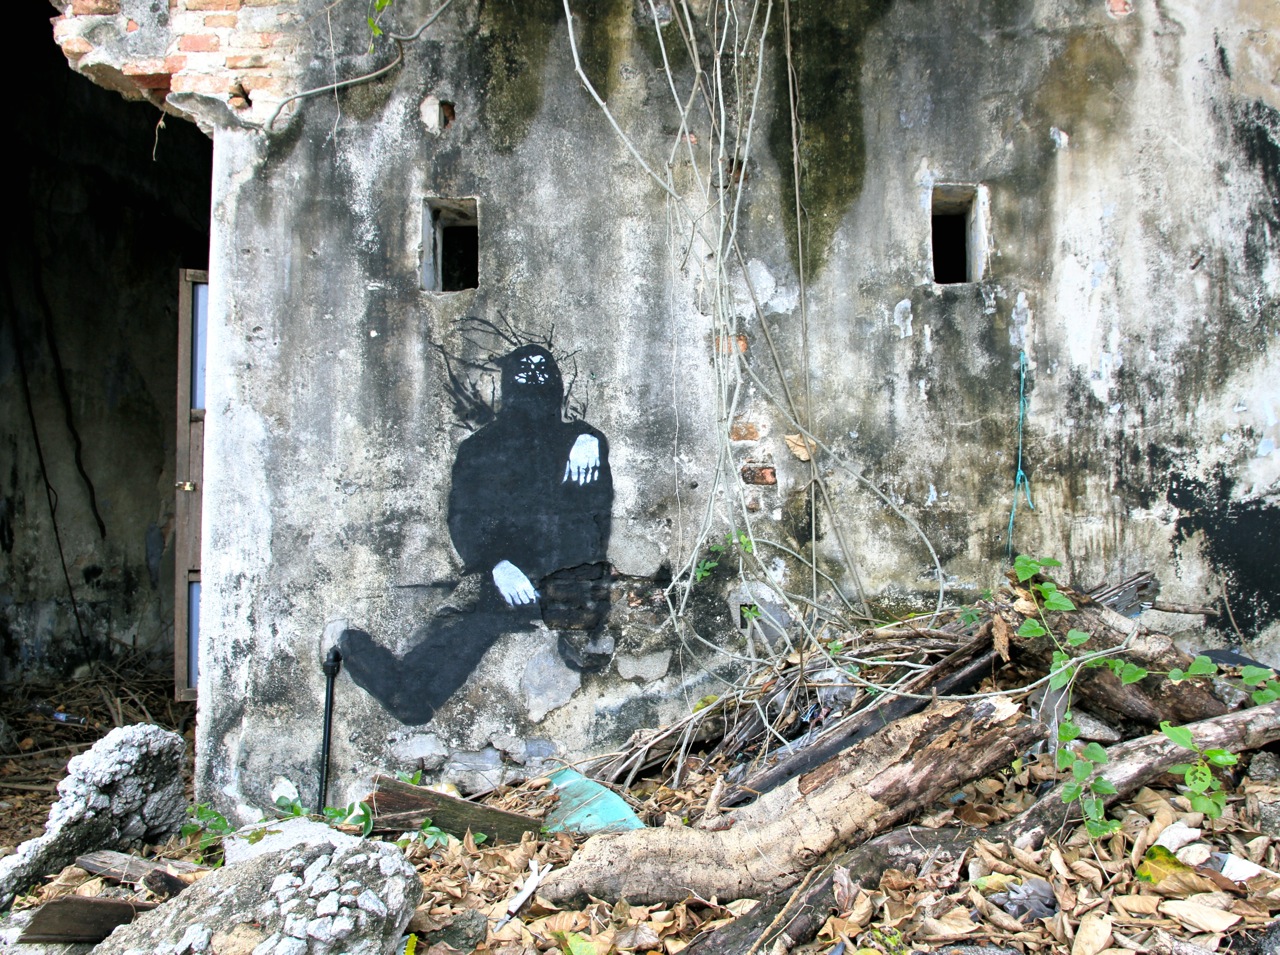 02. Ernest Zacharevic and Martin Ron Murales